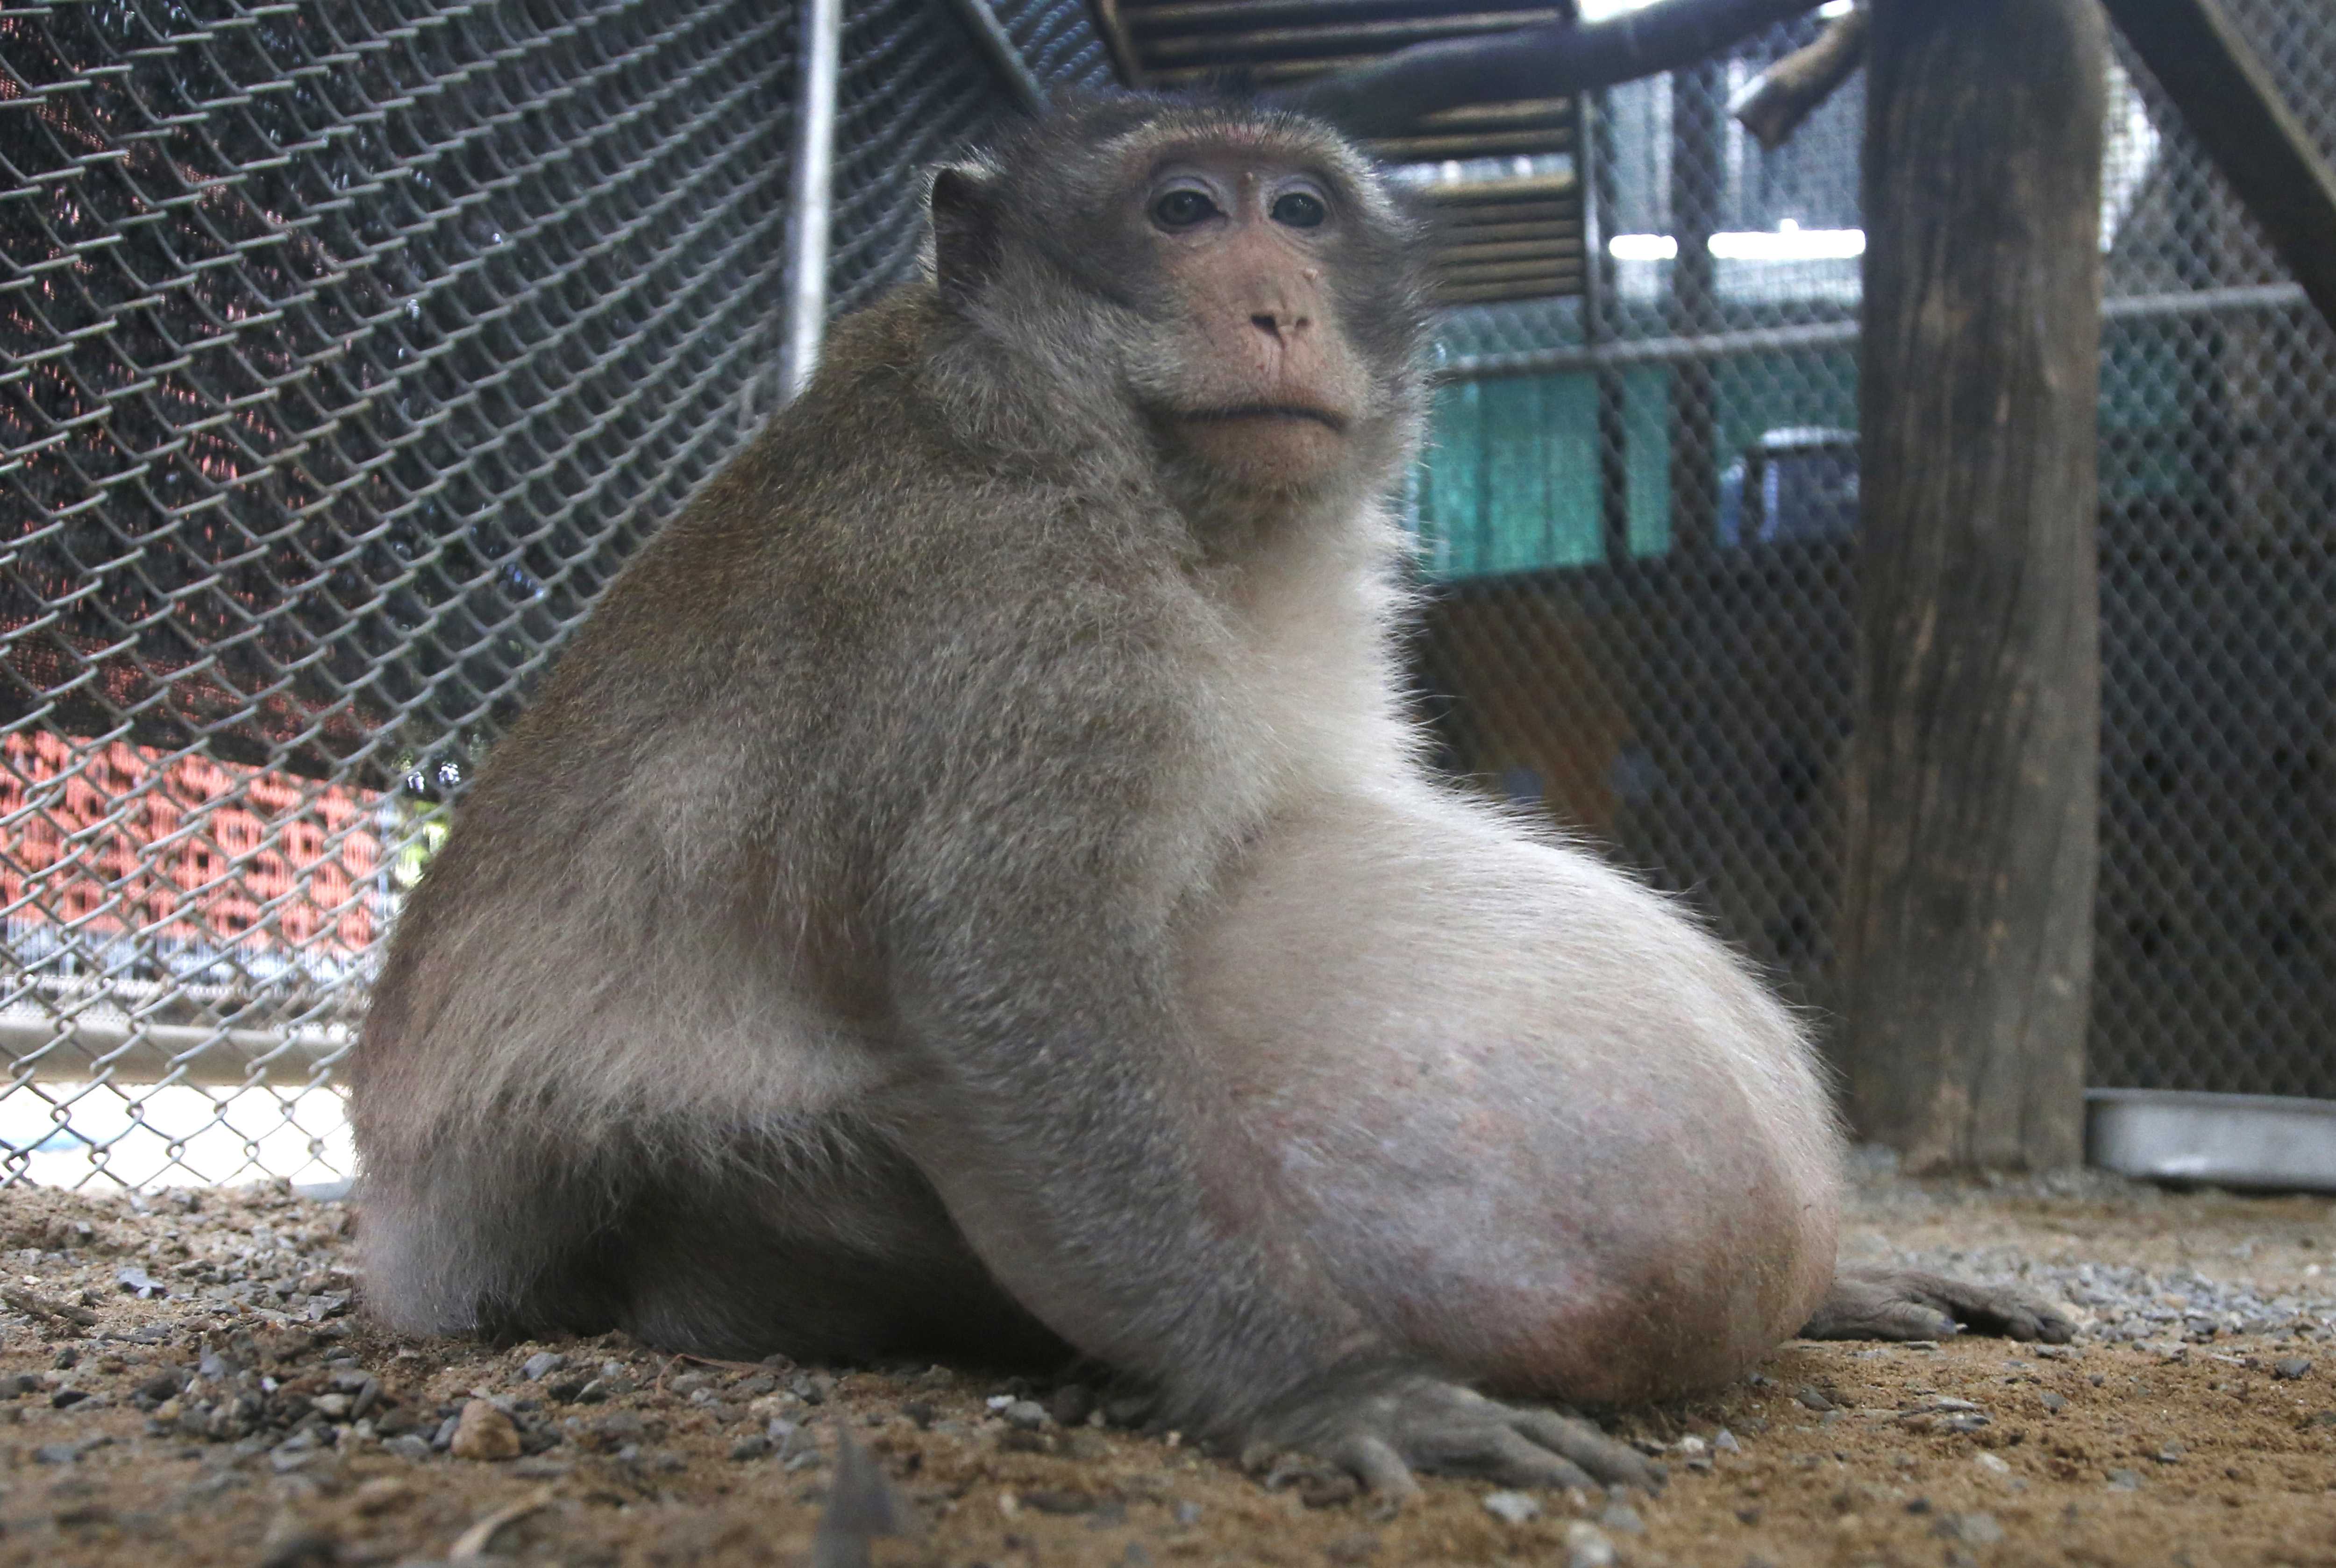 Authorities in Thailand put this morbidly obese monkey on a diet